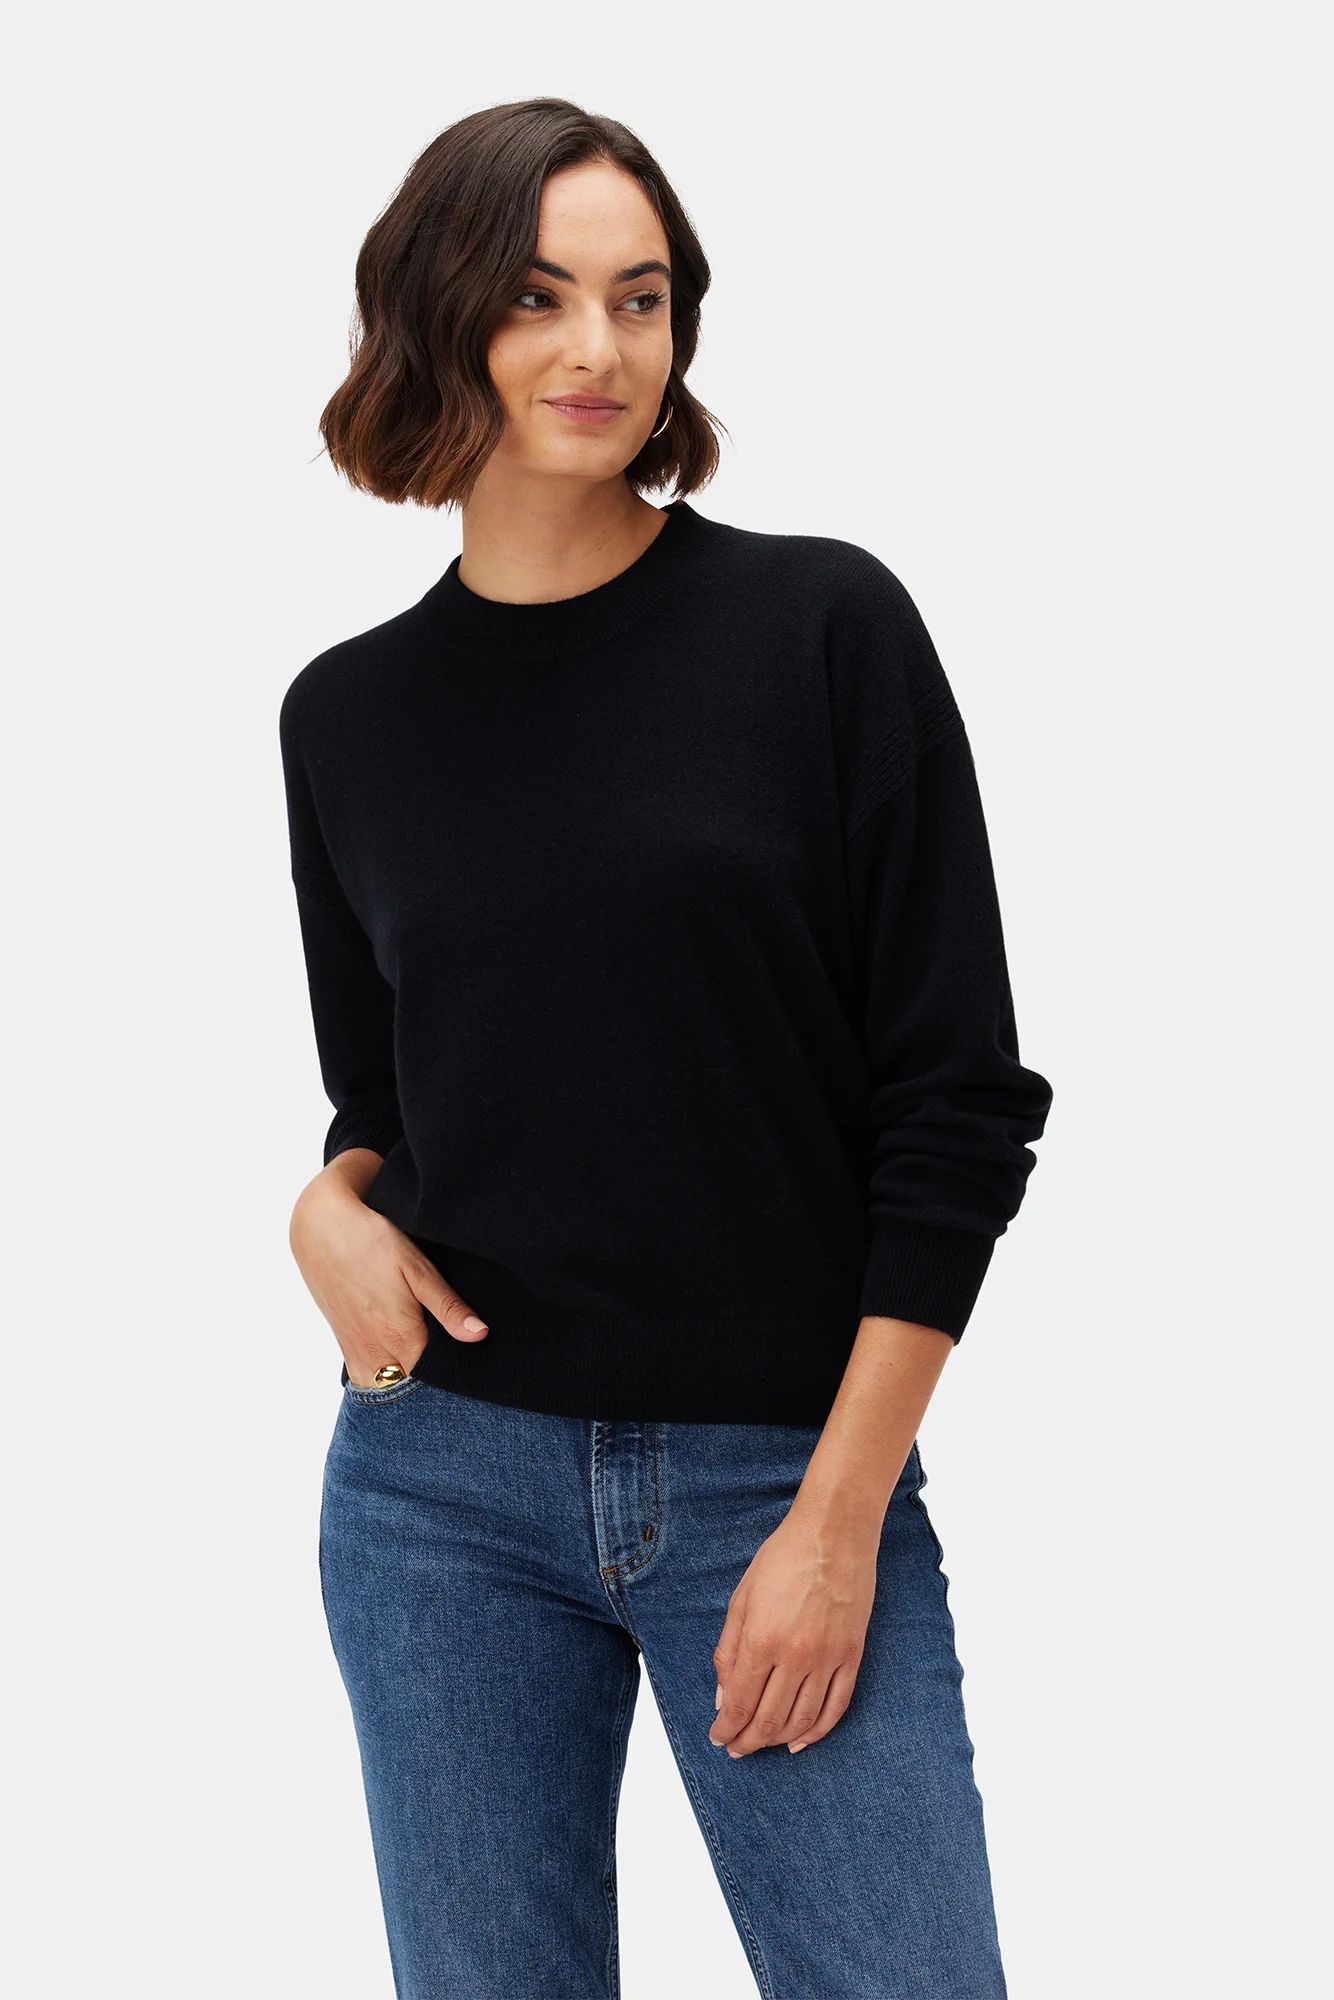 Pearl Cashmere Sweater - Licorice | Amour Vert